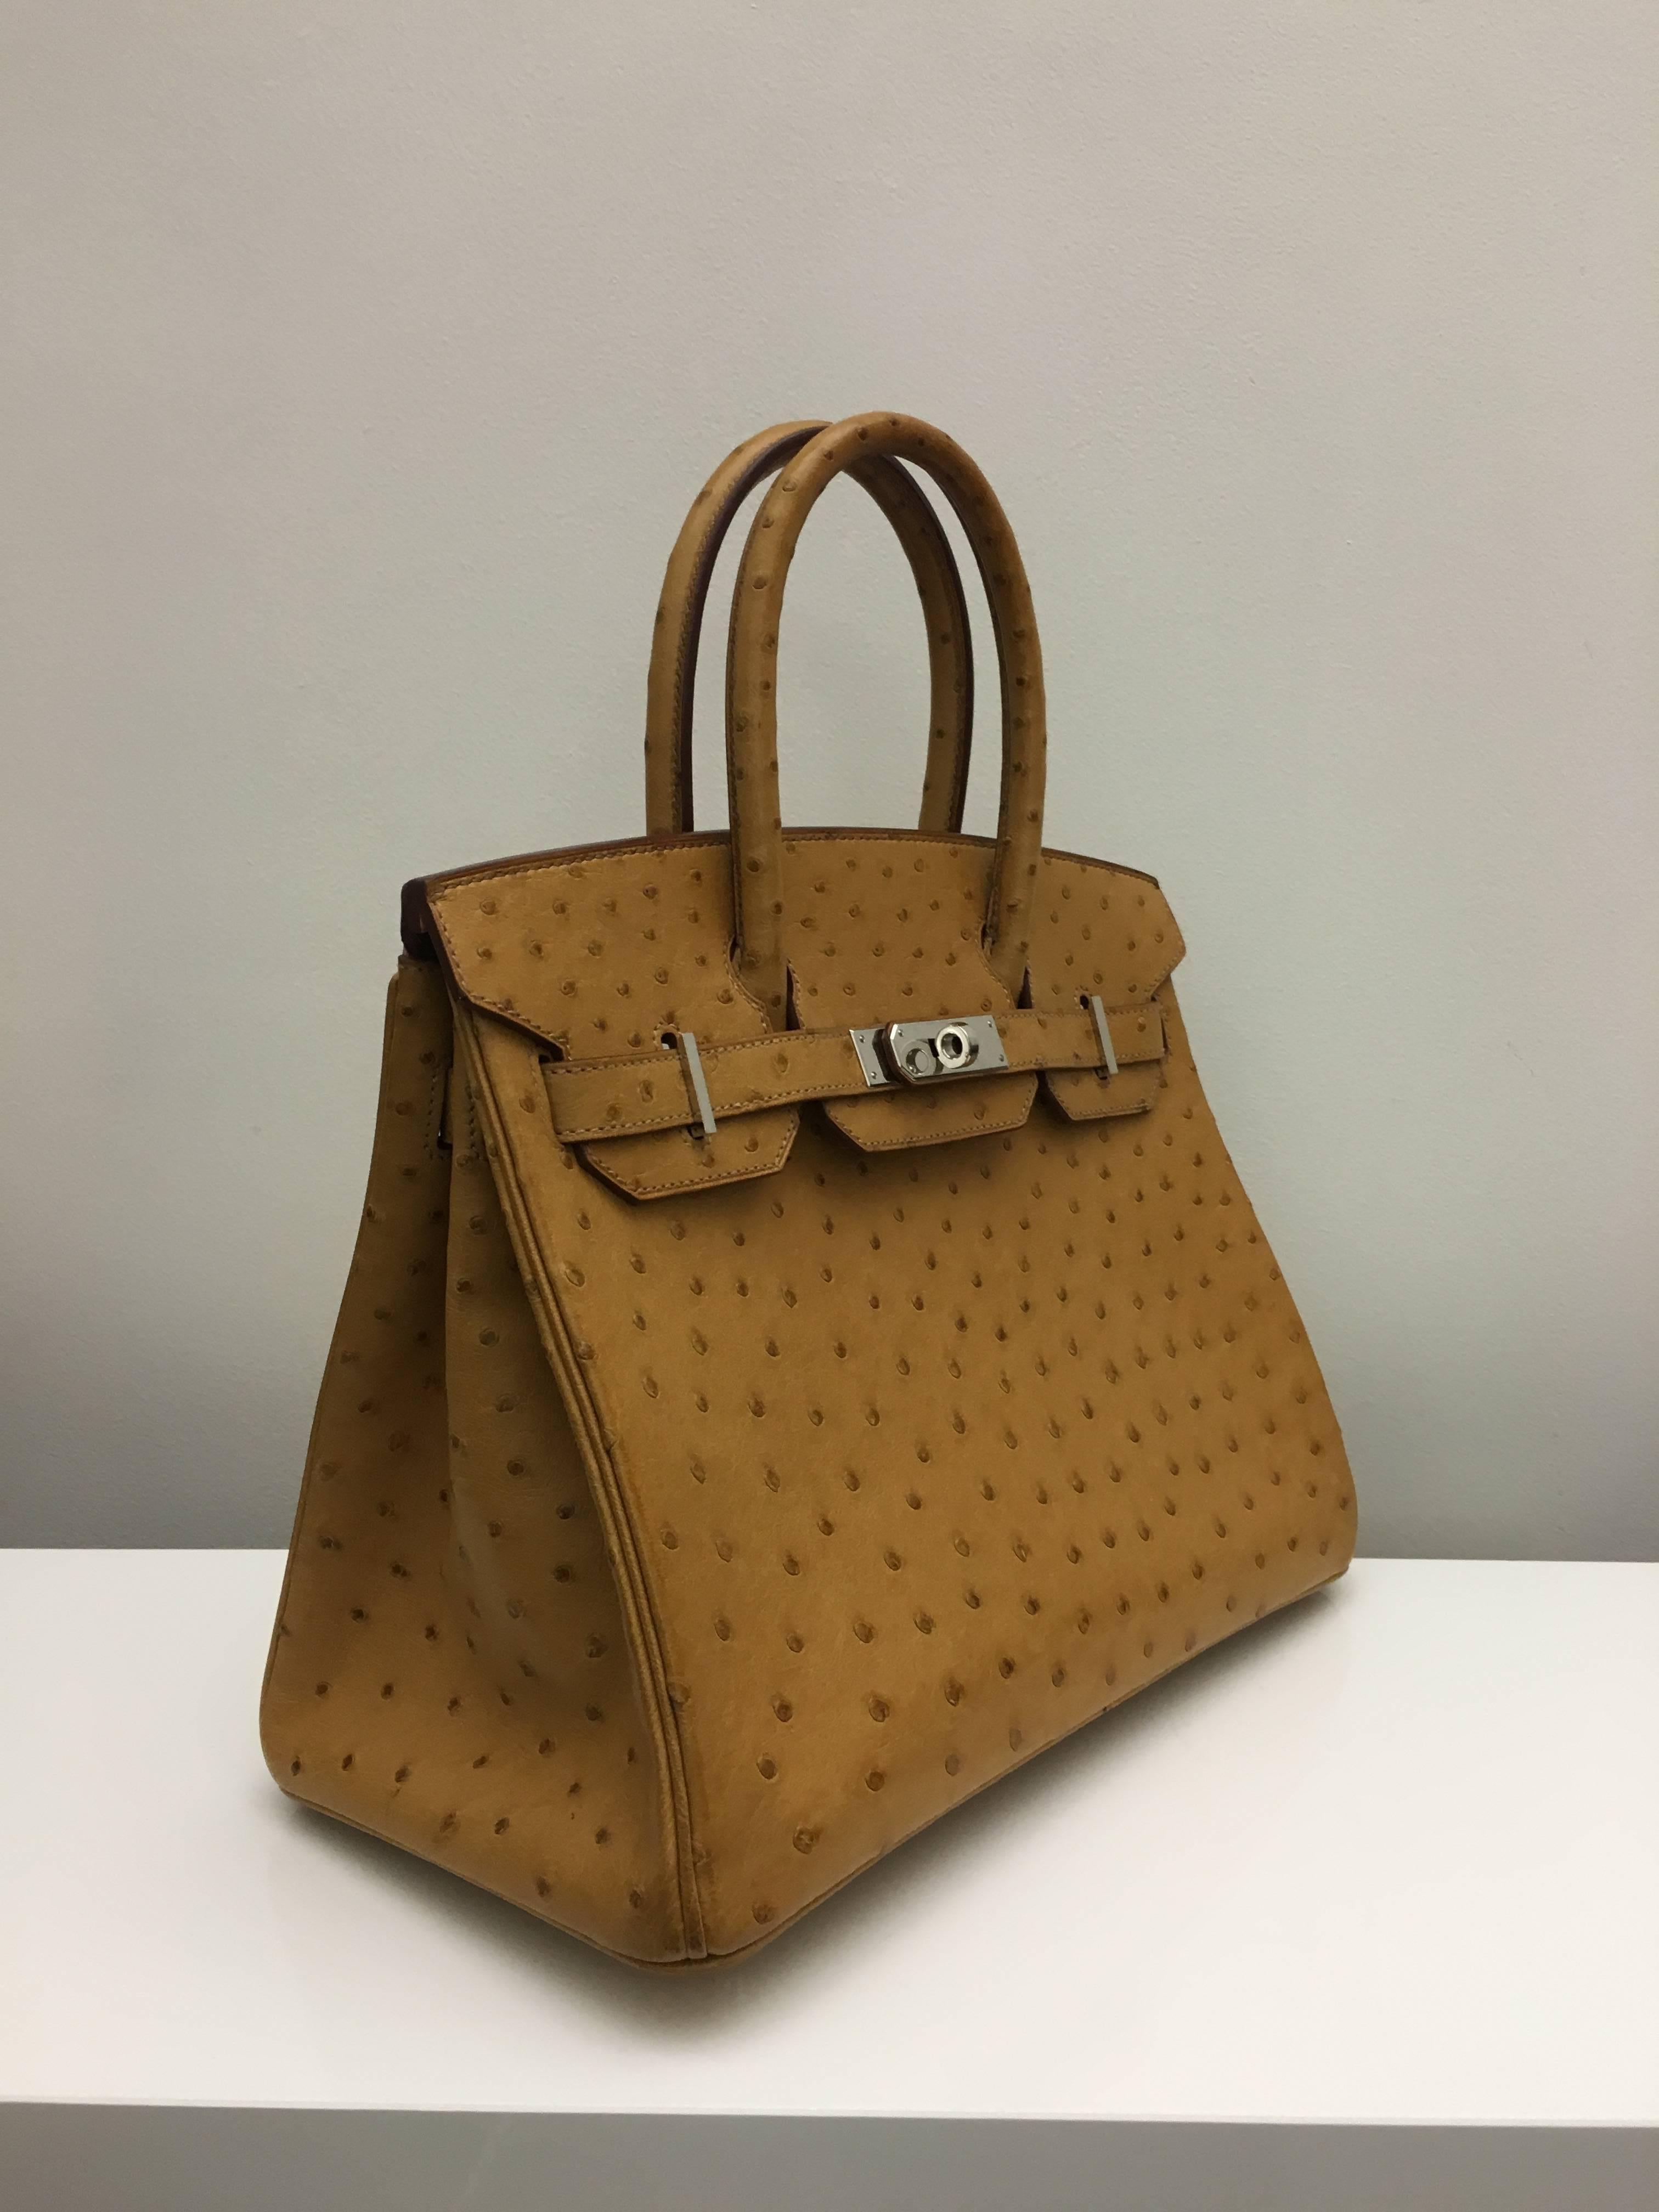 Hermes 
Birkin Size 30
Ostrich Leather 
Colour Tabac Gold
Palladium (silver) Hardware 
store fresh, comes with receipt and full set (dust bag, box...) 
Hydeparkfashion specializes in sourcing and delivering authentic luxury handbags, mainly